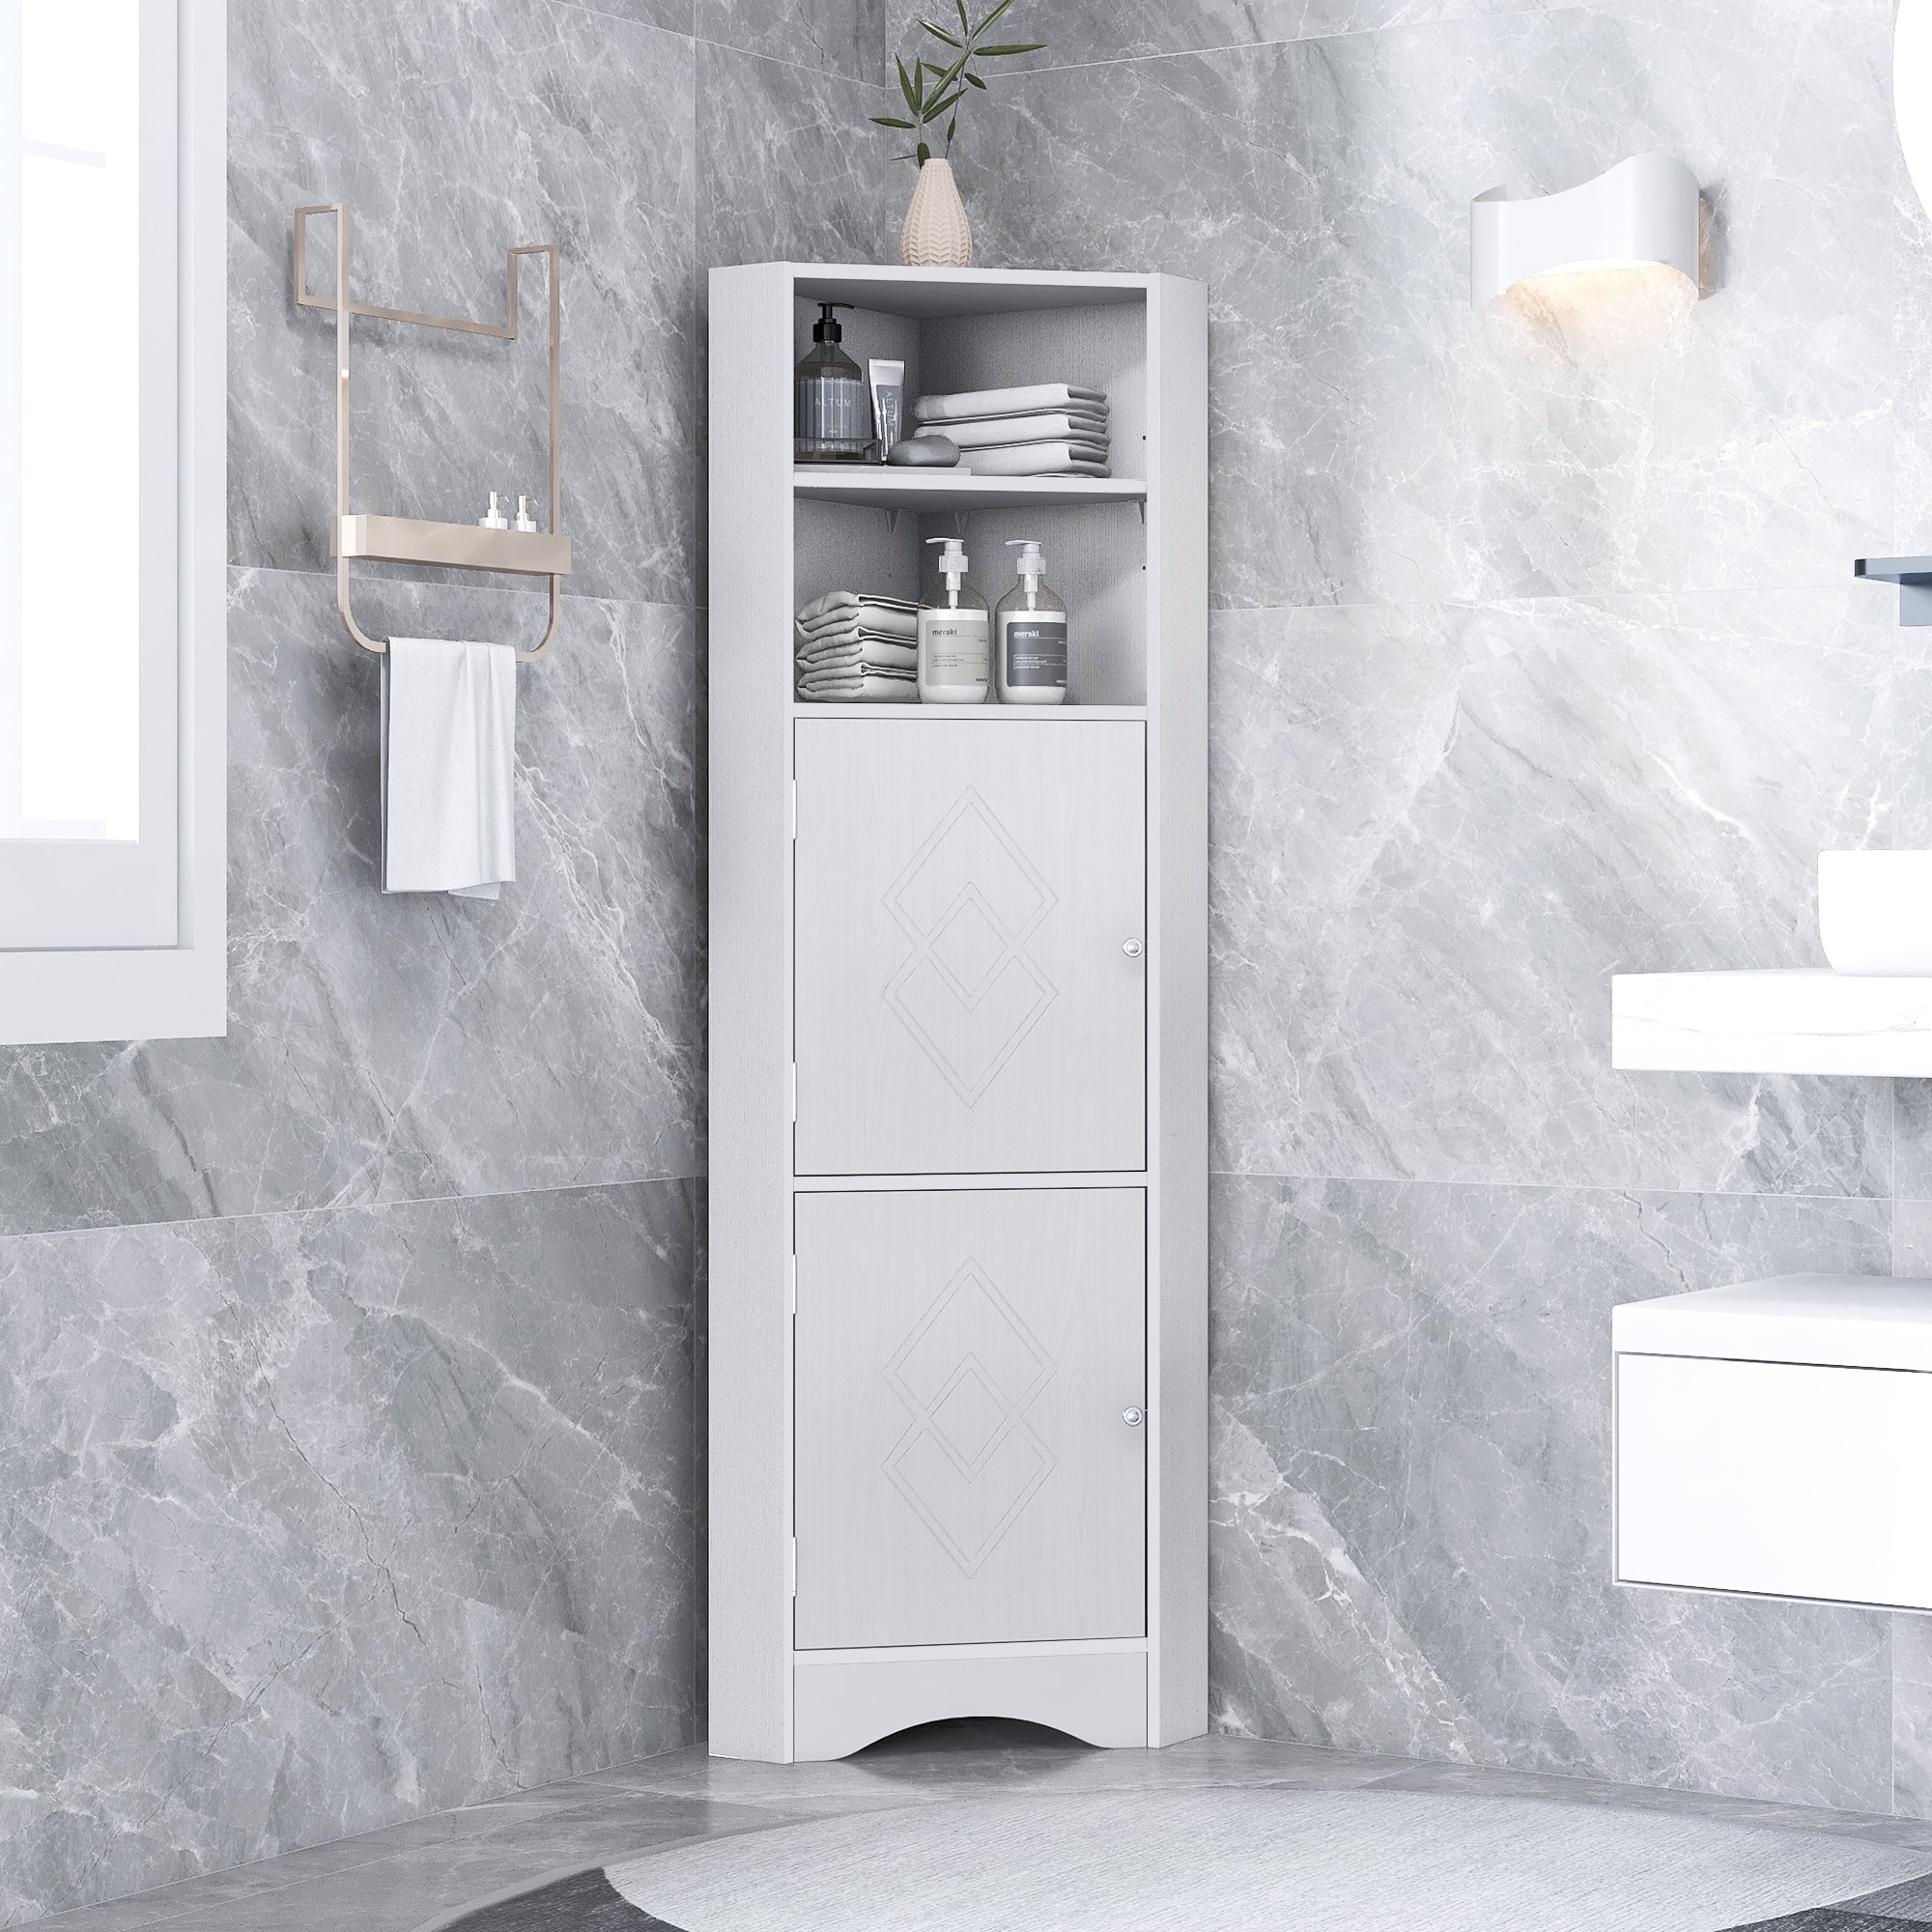 https://ak1.ostkcdn.com/images/products/is/images/direct/0a15d833563fa99490832c966482d532dab7b8d0/Nestfair-Tall-Freestanding-Bathroom-Cabinet-Corner-Storage-Cabinet-with-Doors-and-Adjustable-Shelves.jpg